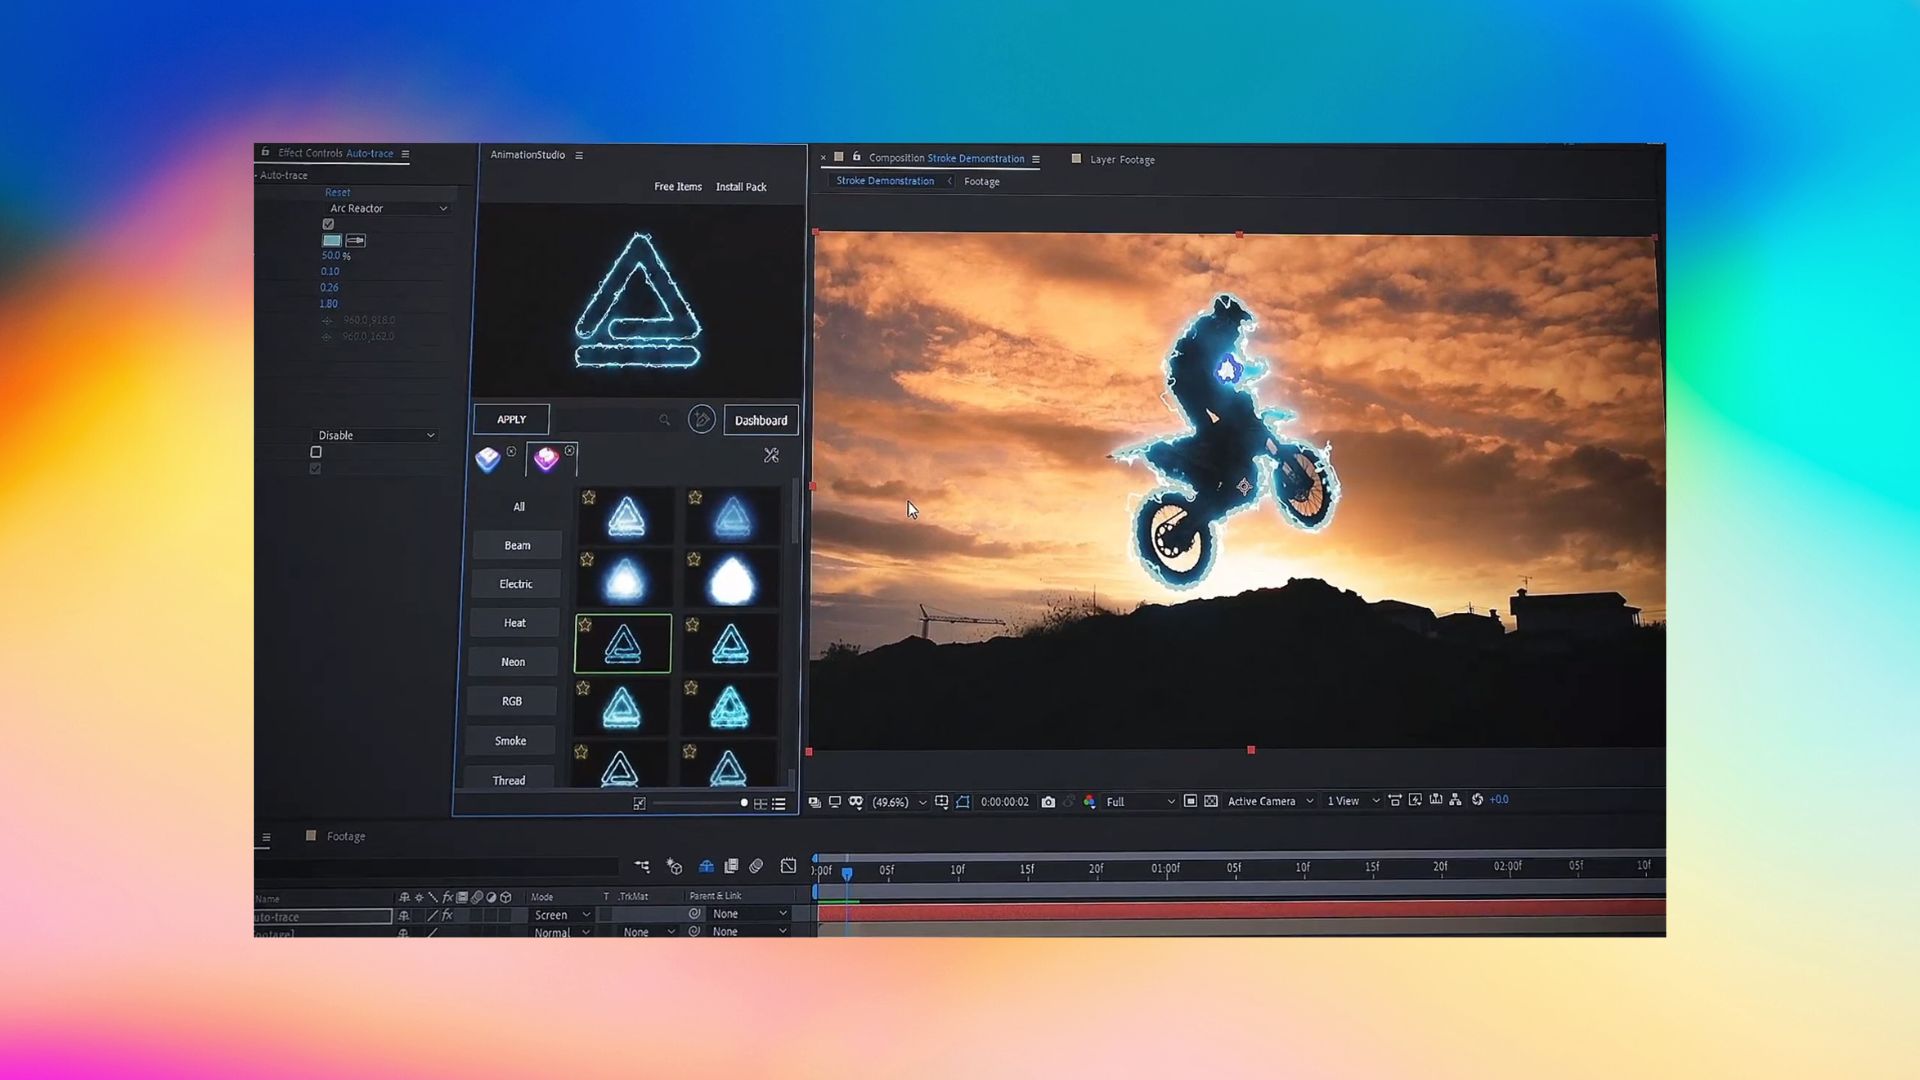 After Effects Free Download & Free Trial